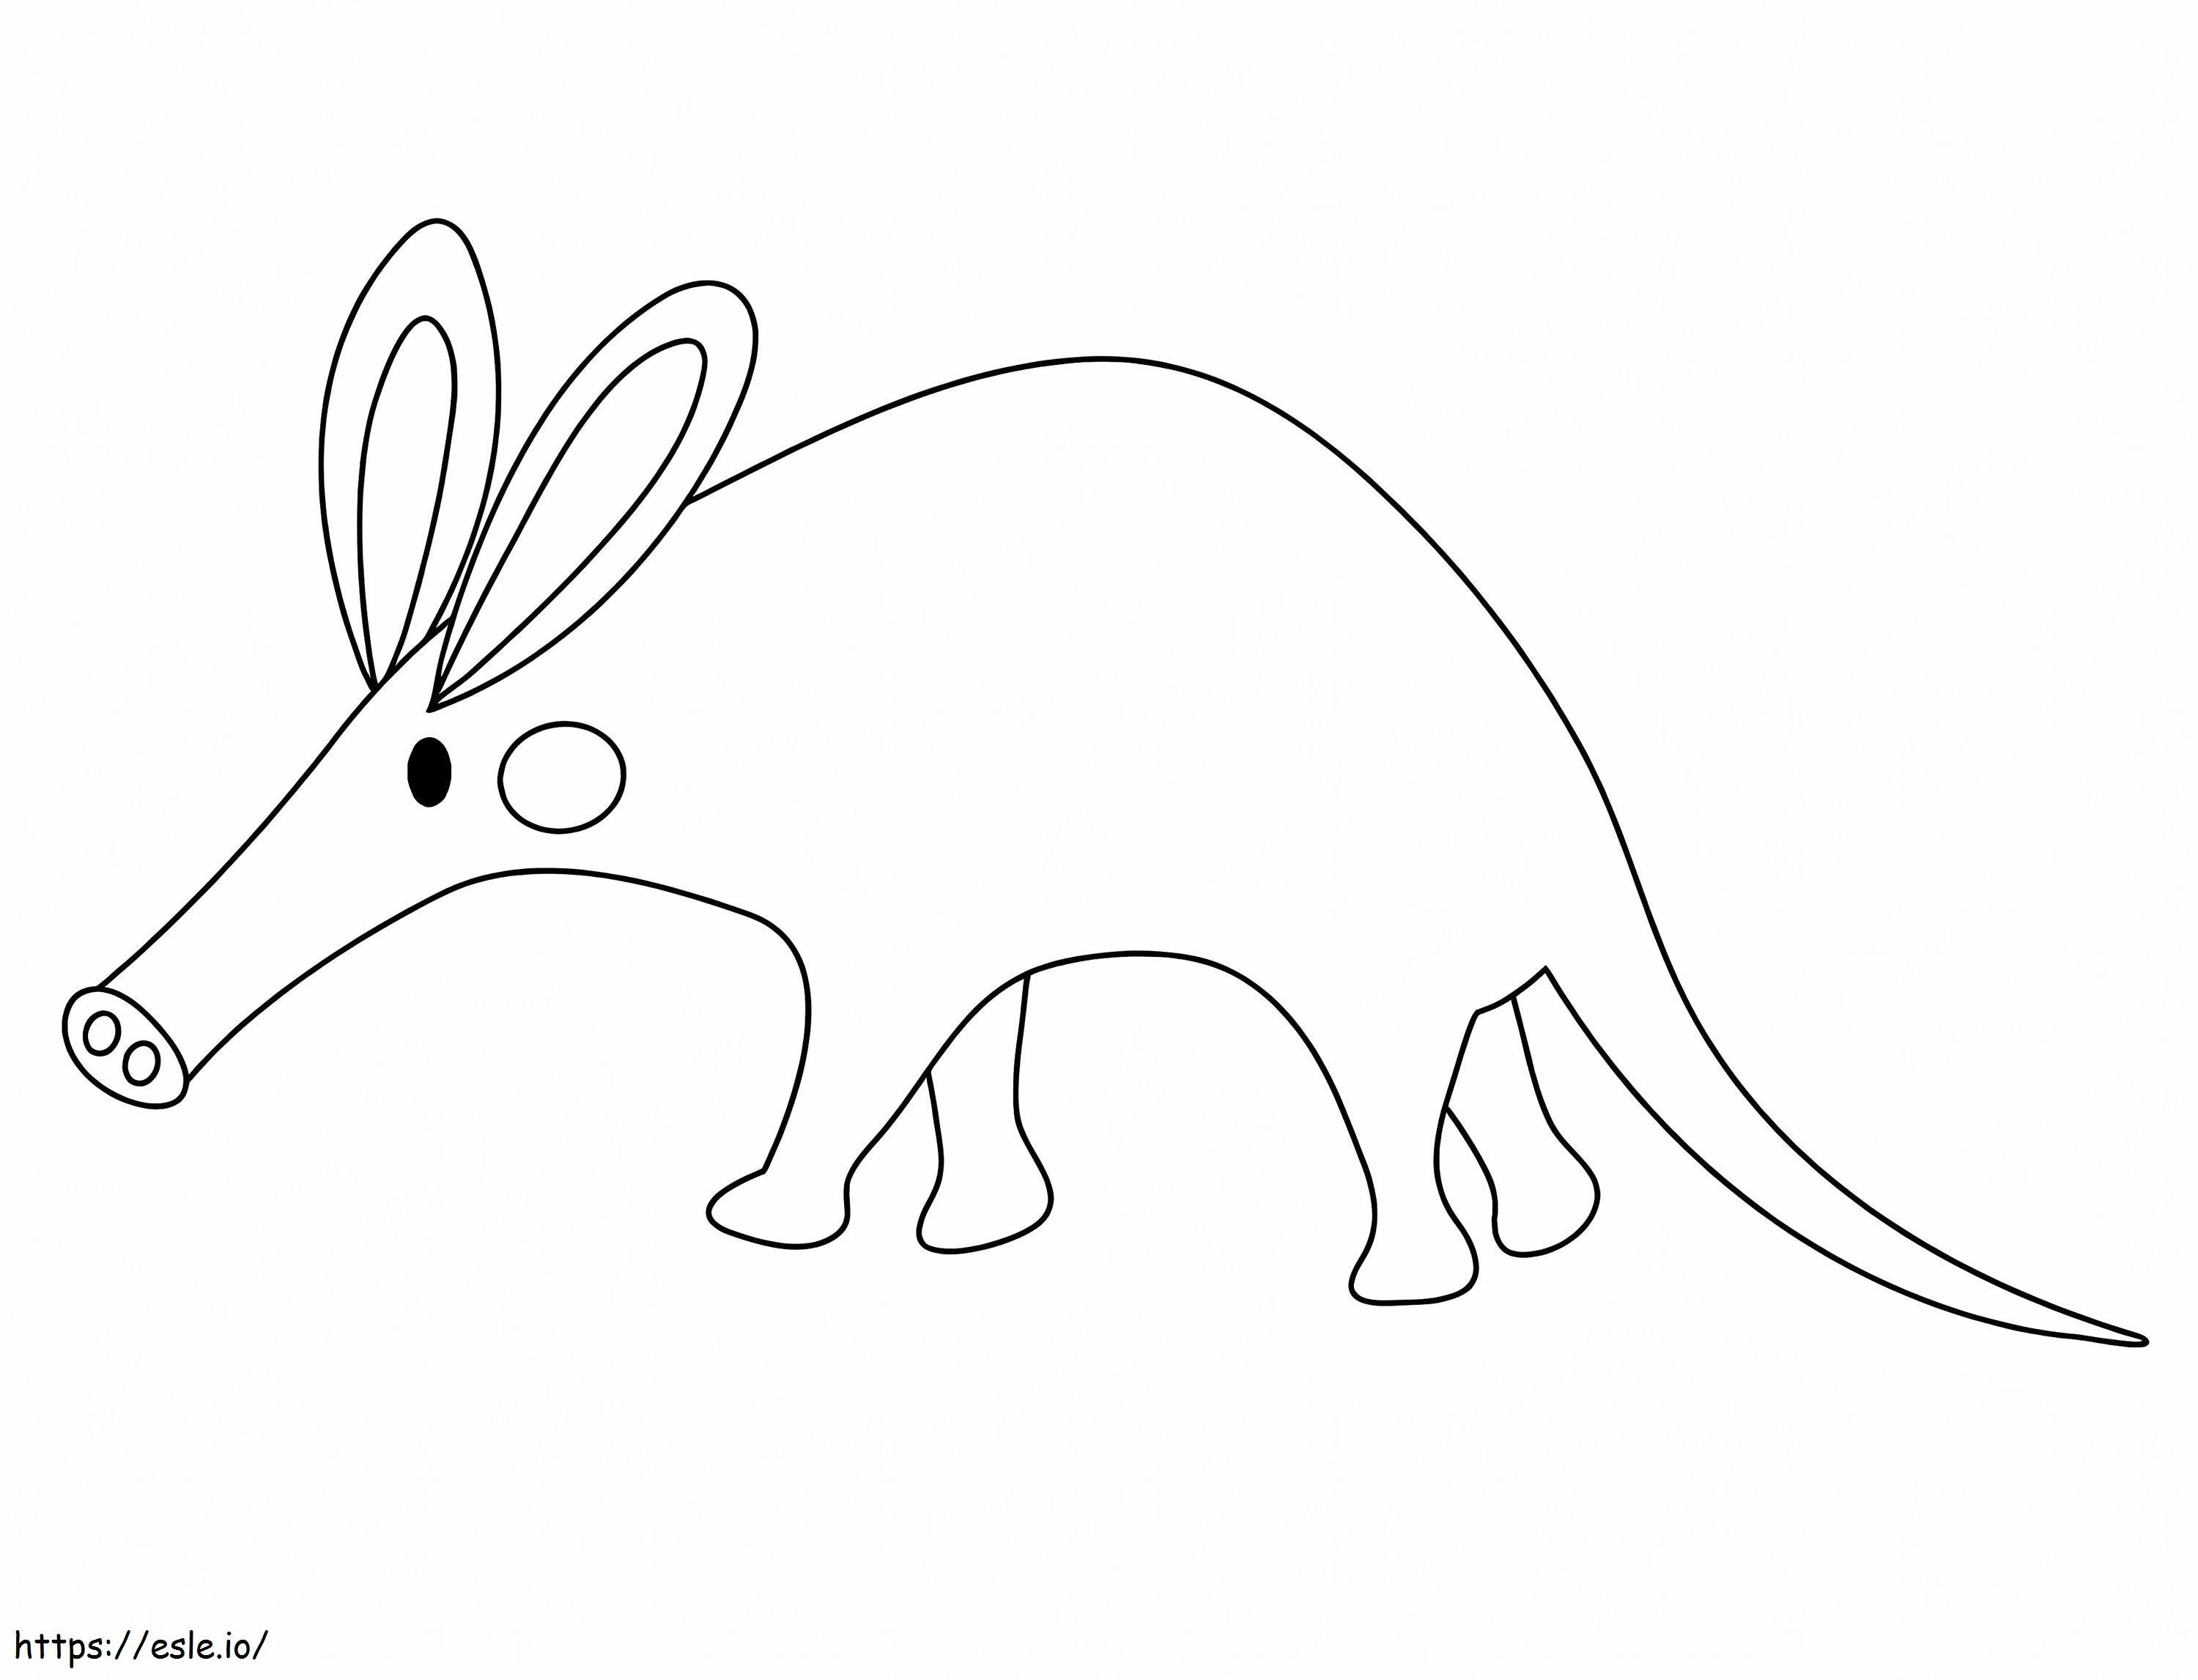 Adorable Anteater coloring page